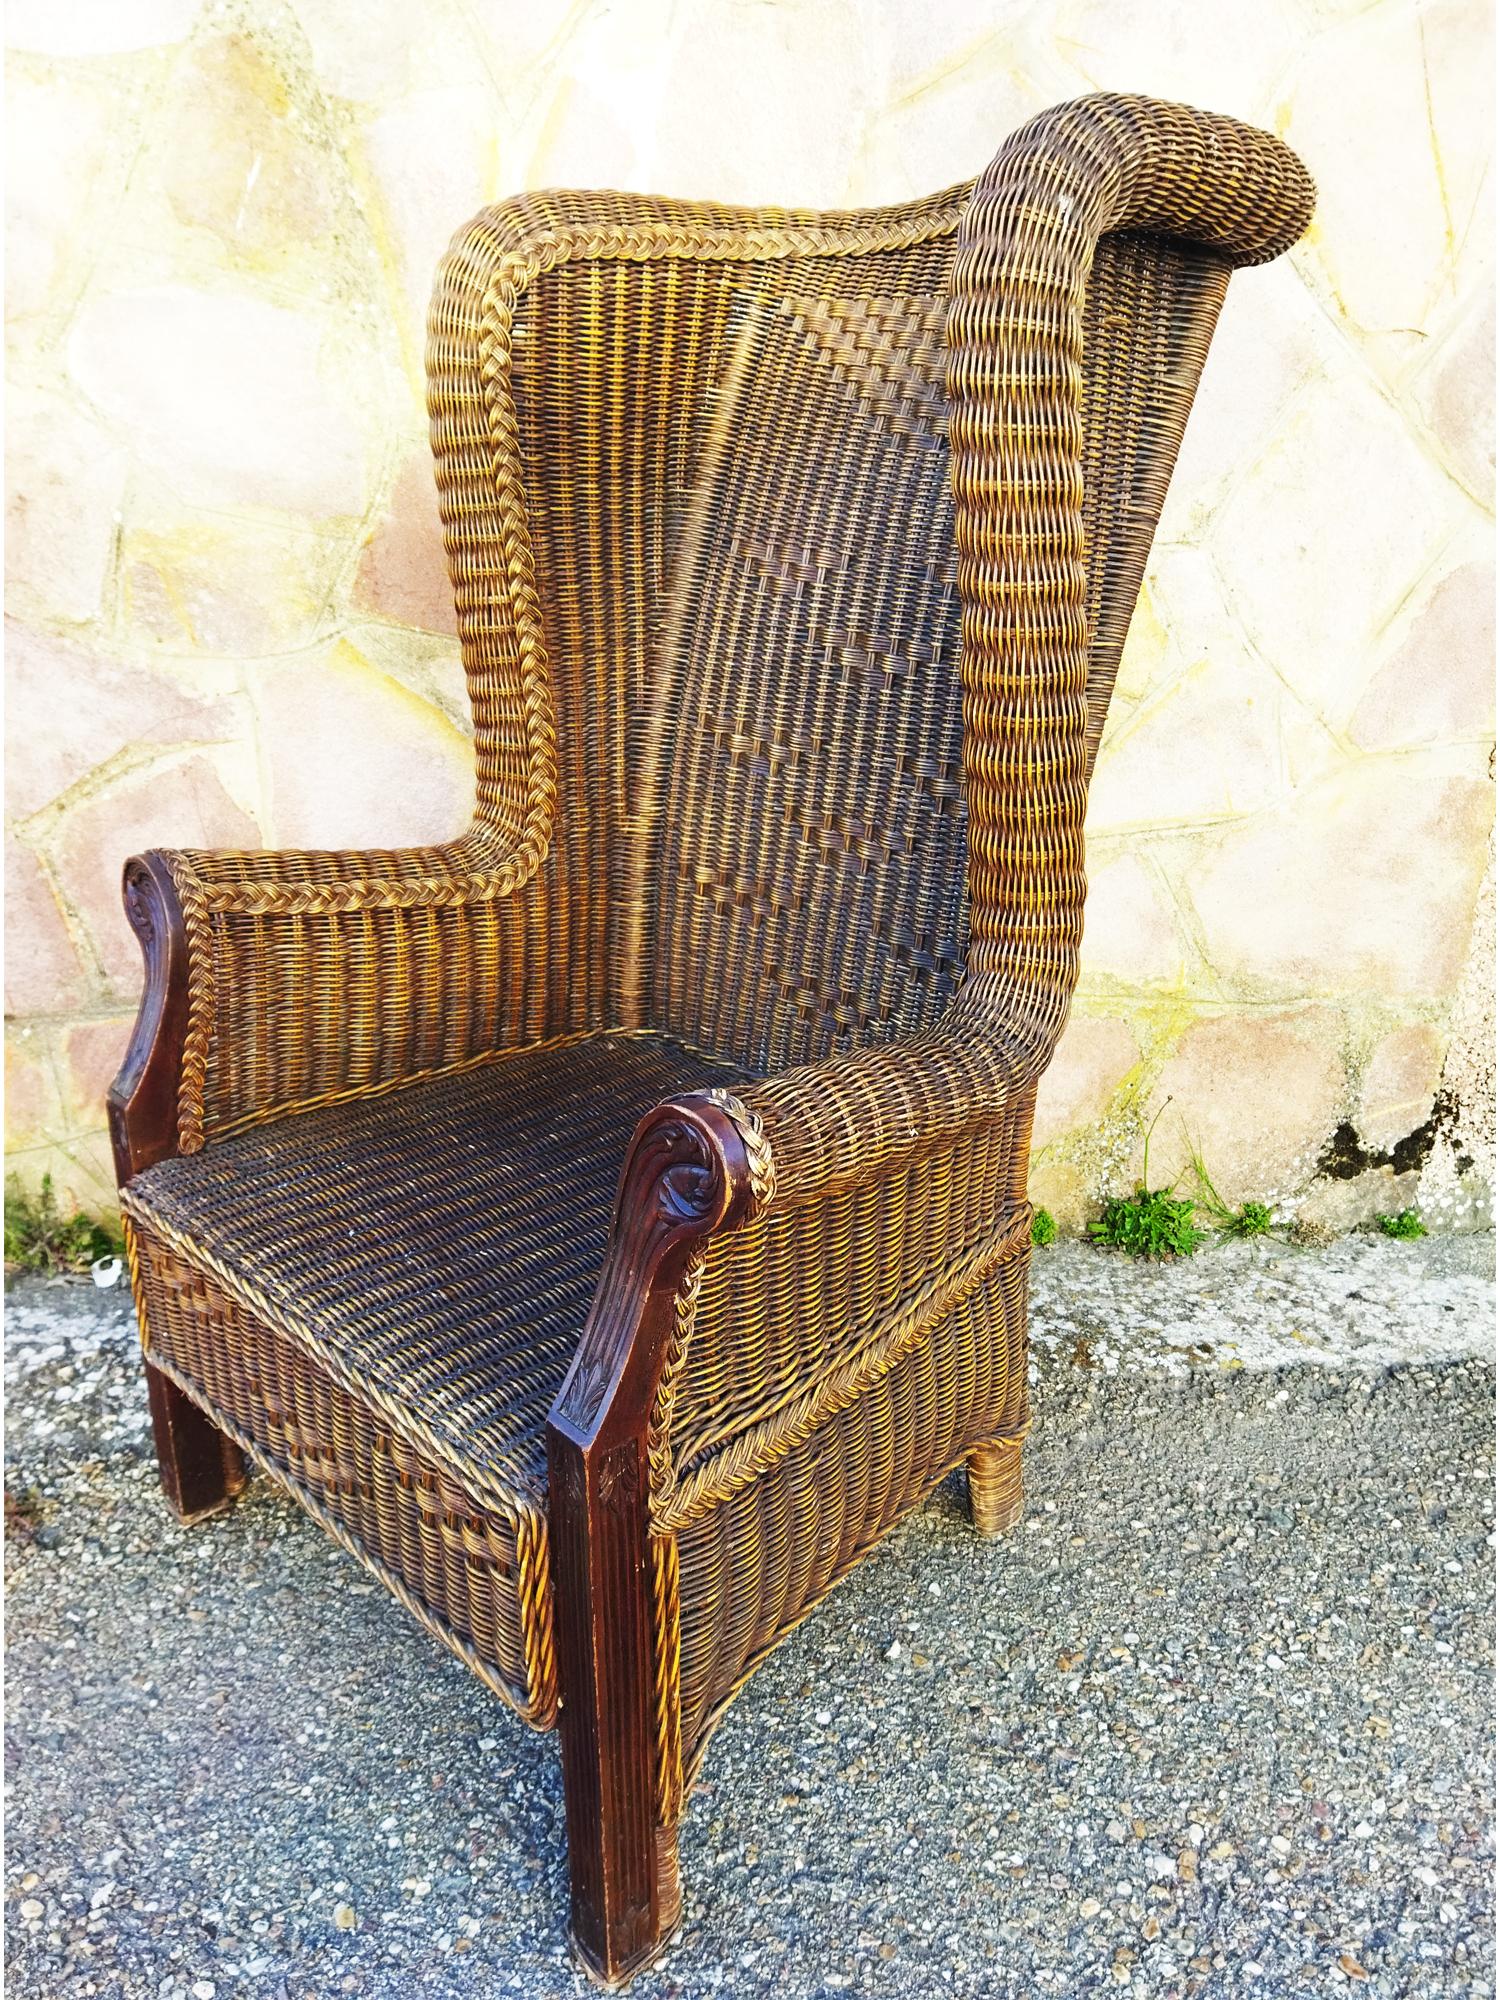  Spectacular VictorianStyle  Wicker Throne, Very Big  High Backrest  Wide Seat For Sale 1